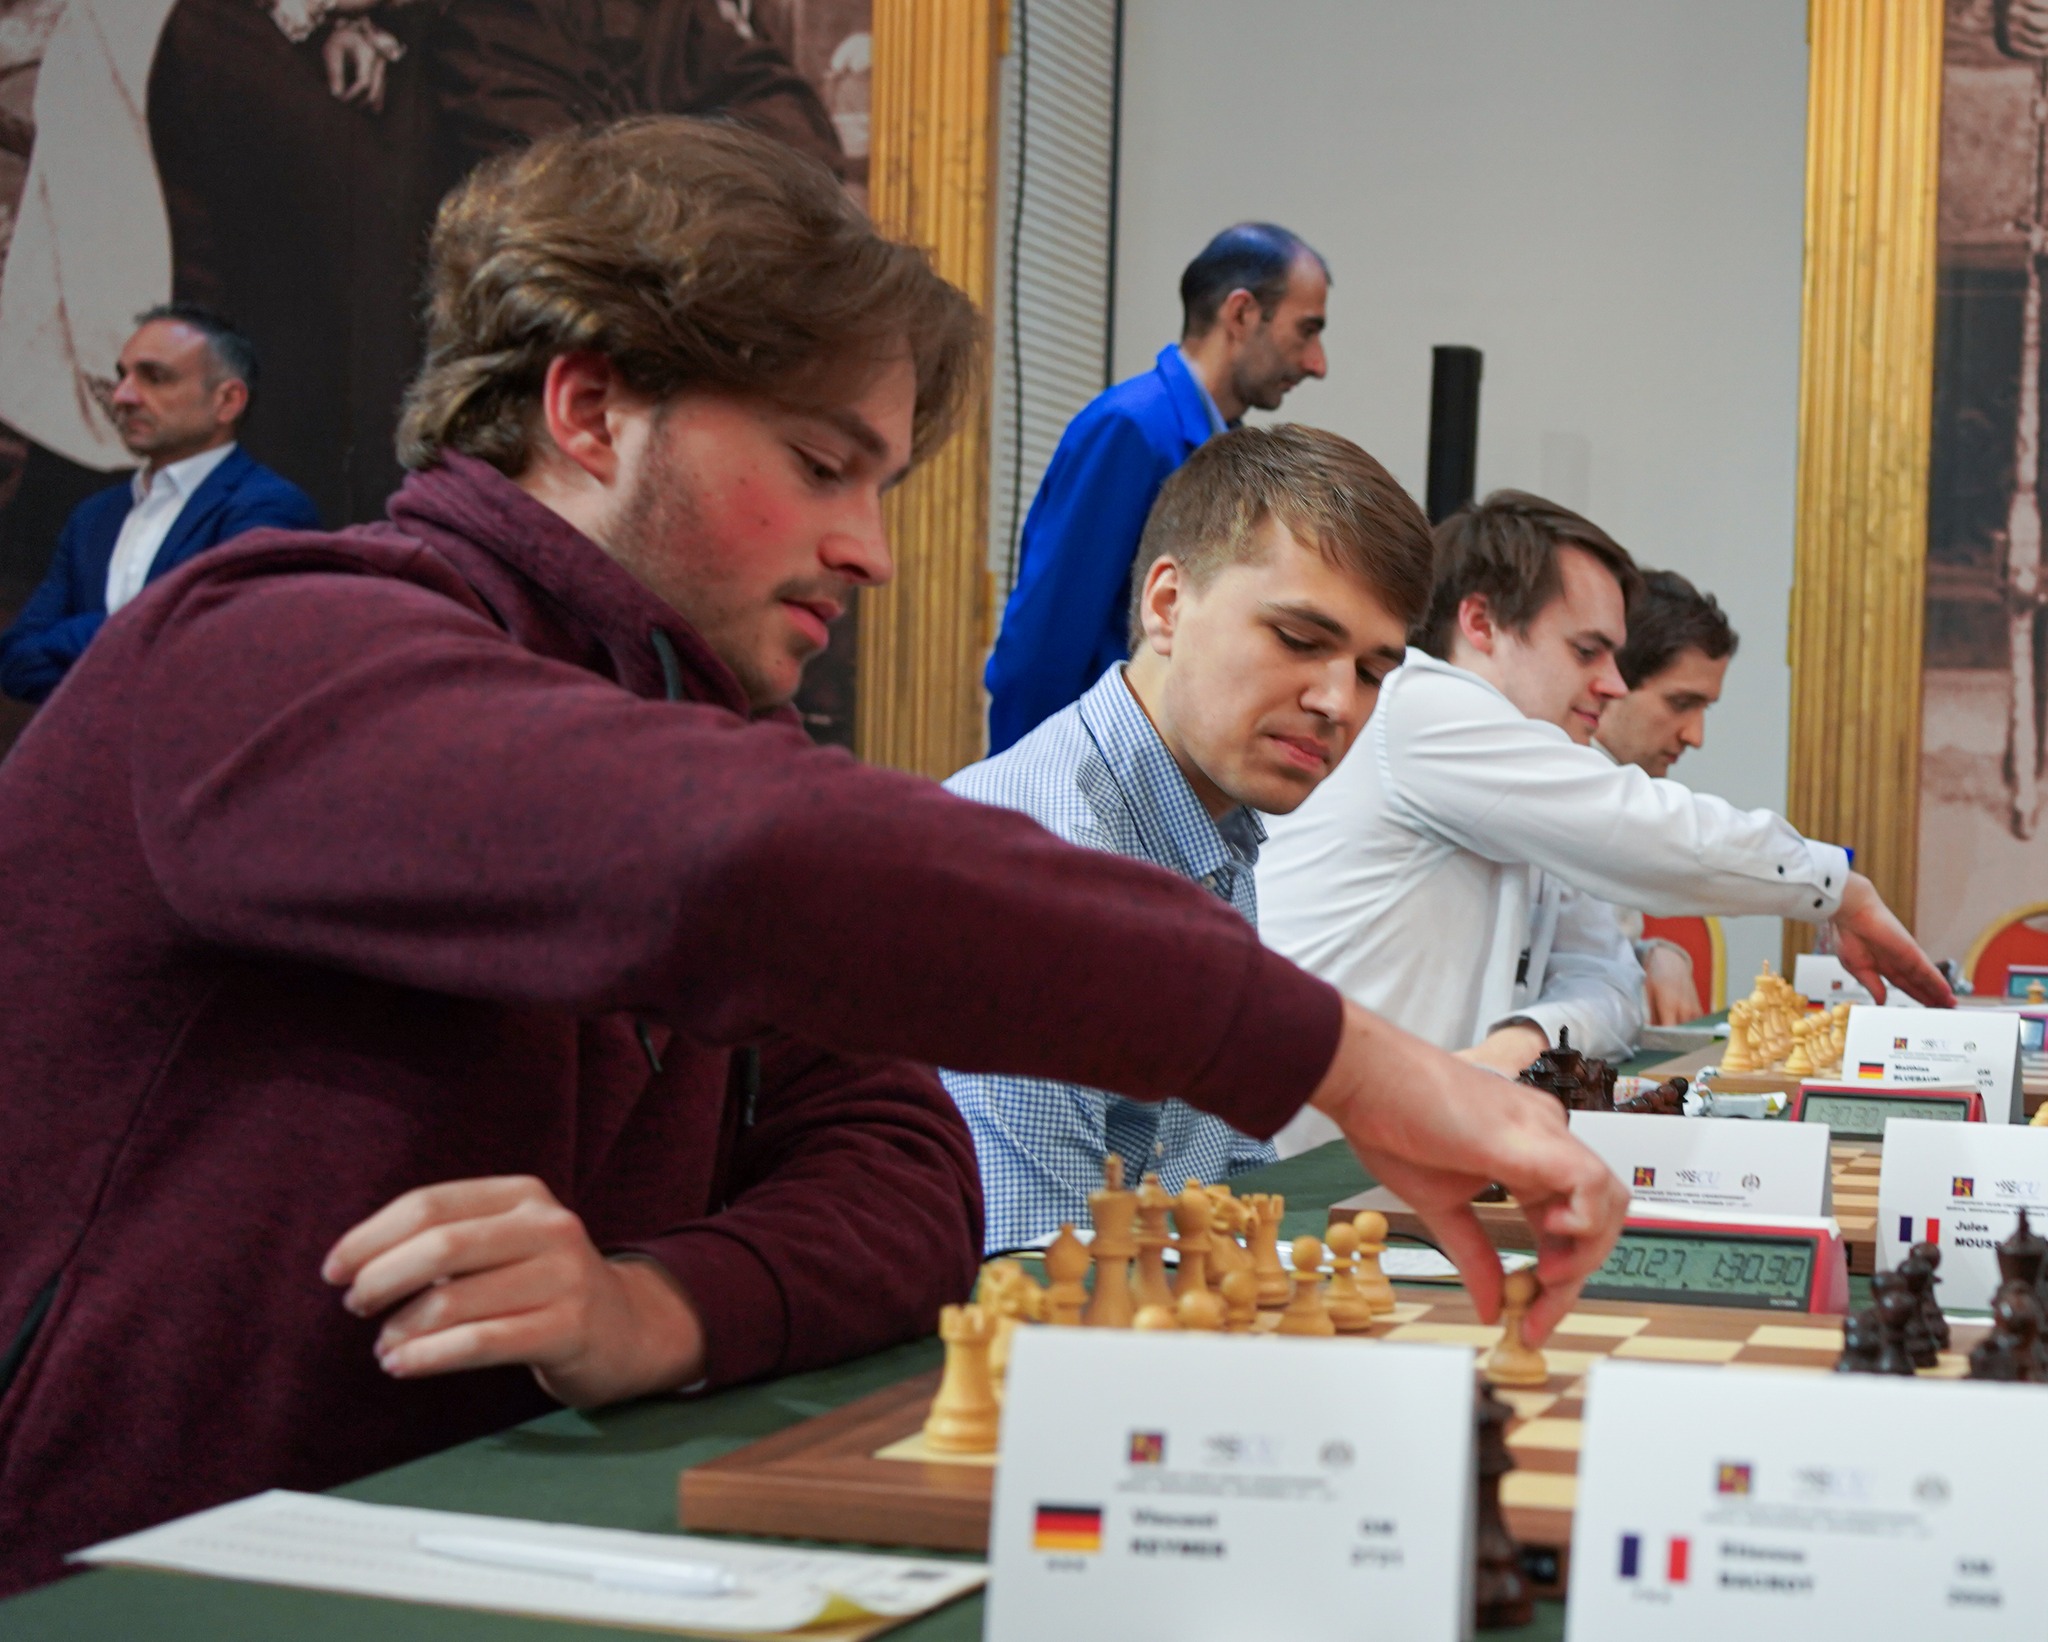 German Team for 44th Chess Olympiad 2022 to be captained by Jan Gustafsson  – Chessdom